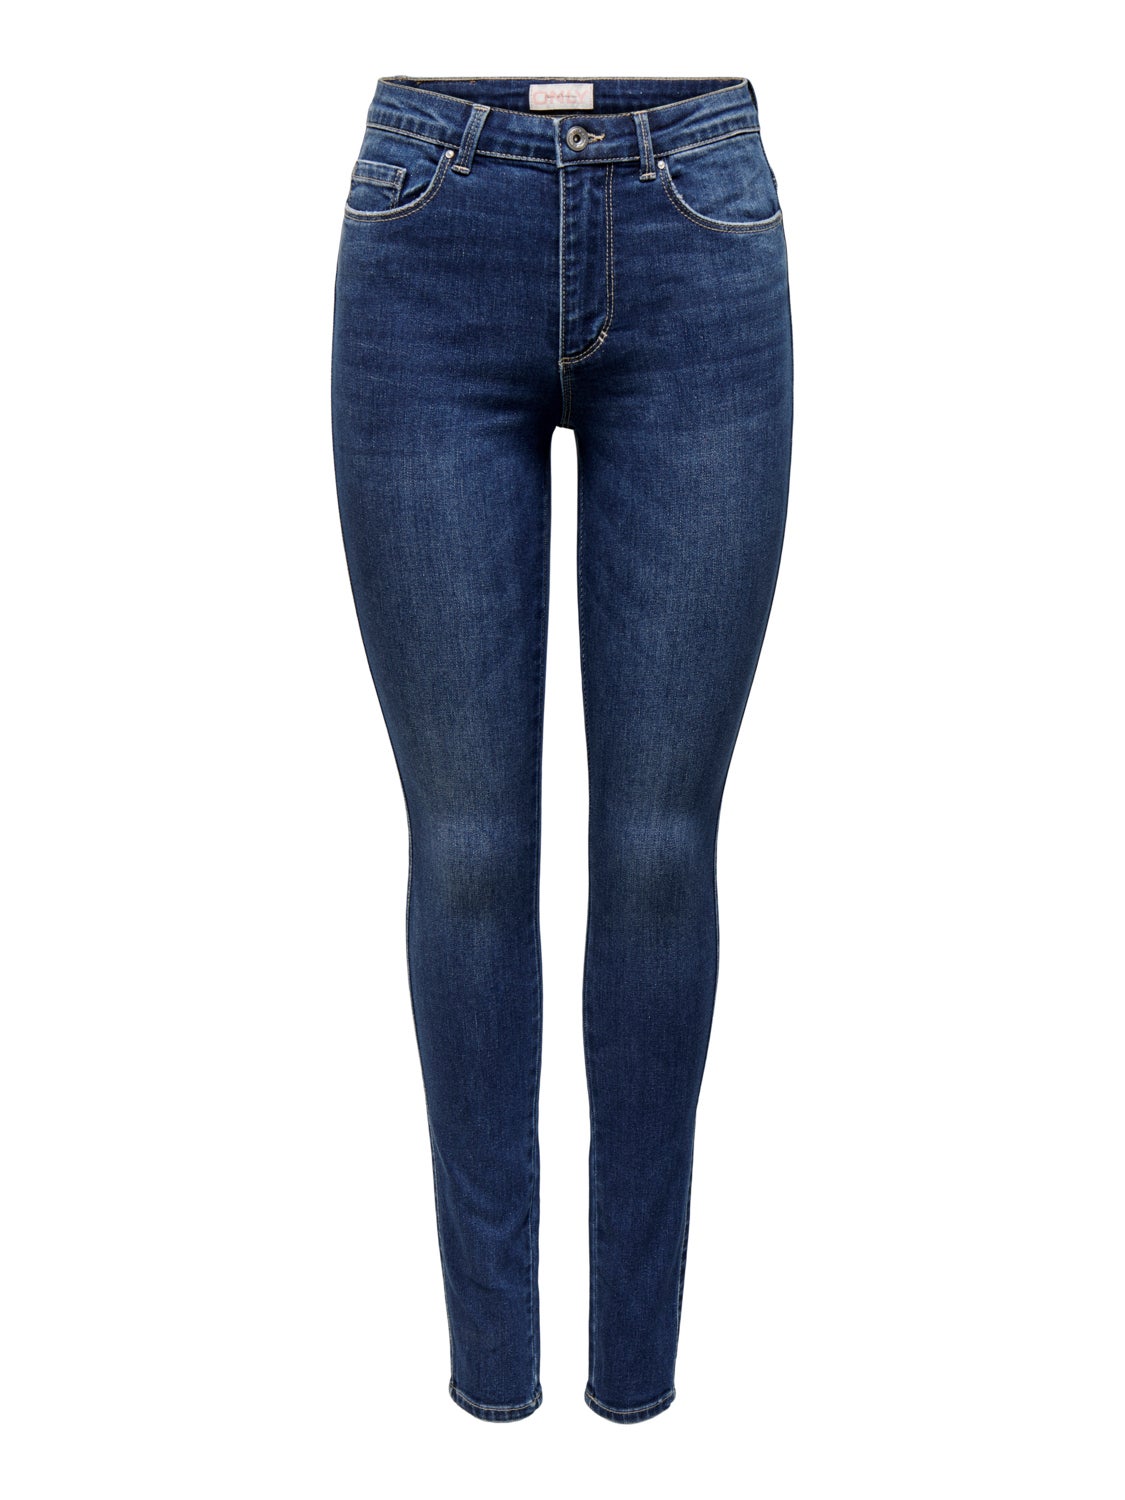 DAMEN Jeans Straight jeans NO STYLE Sophie and Lucie Straight jeans Dunkelblau 34 Rabatt 47 % 